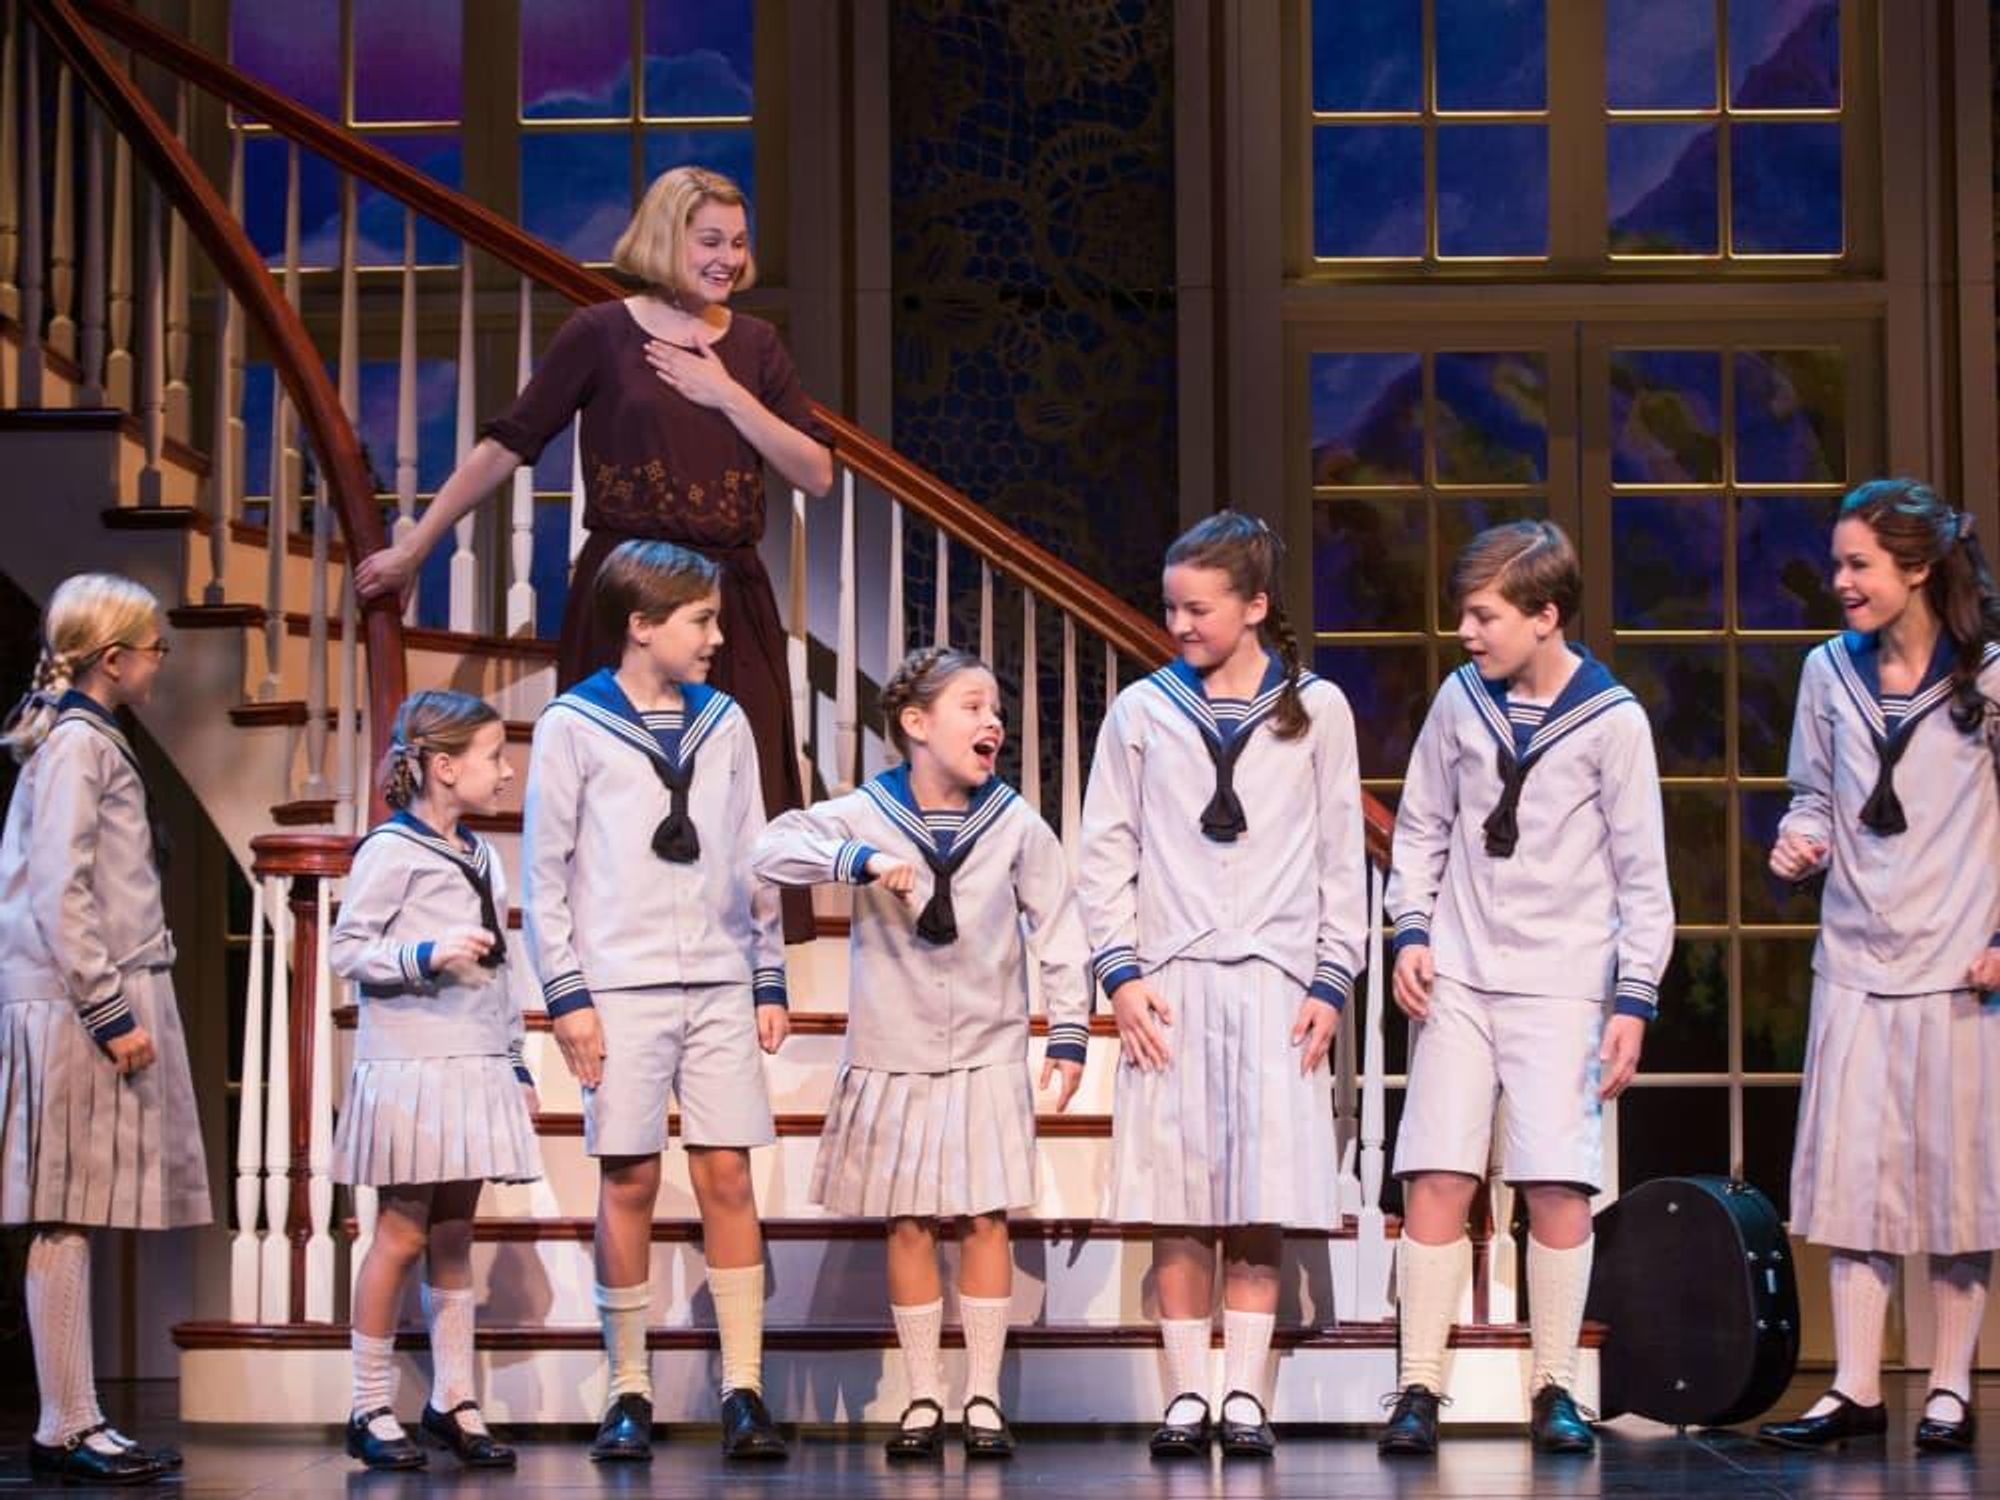 Sound of Music play musical national tour Kerstin Anderson 2016